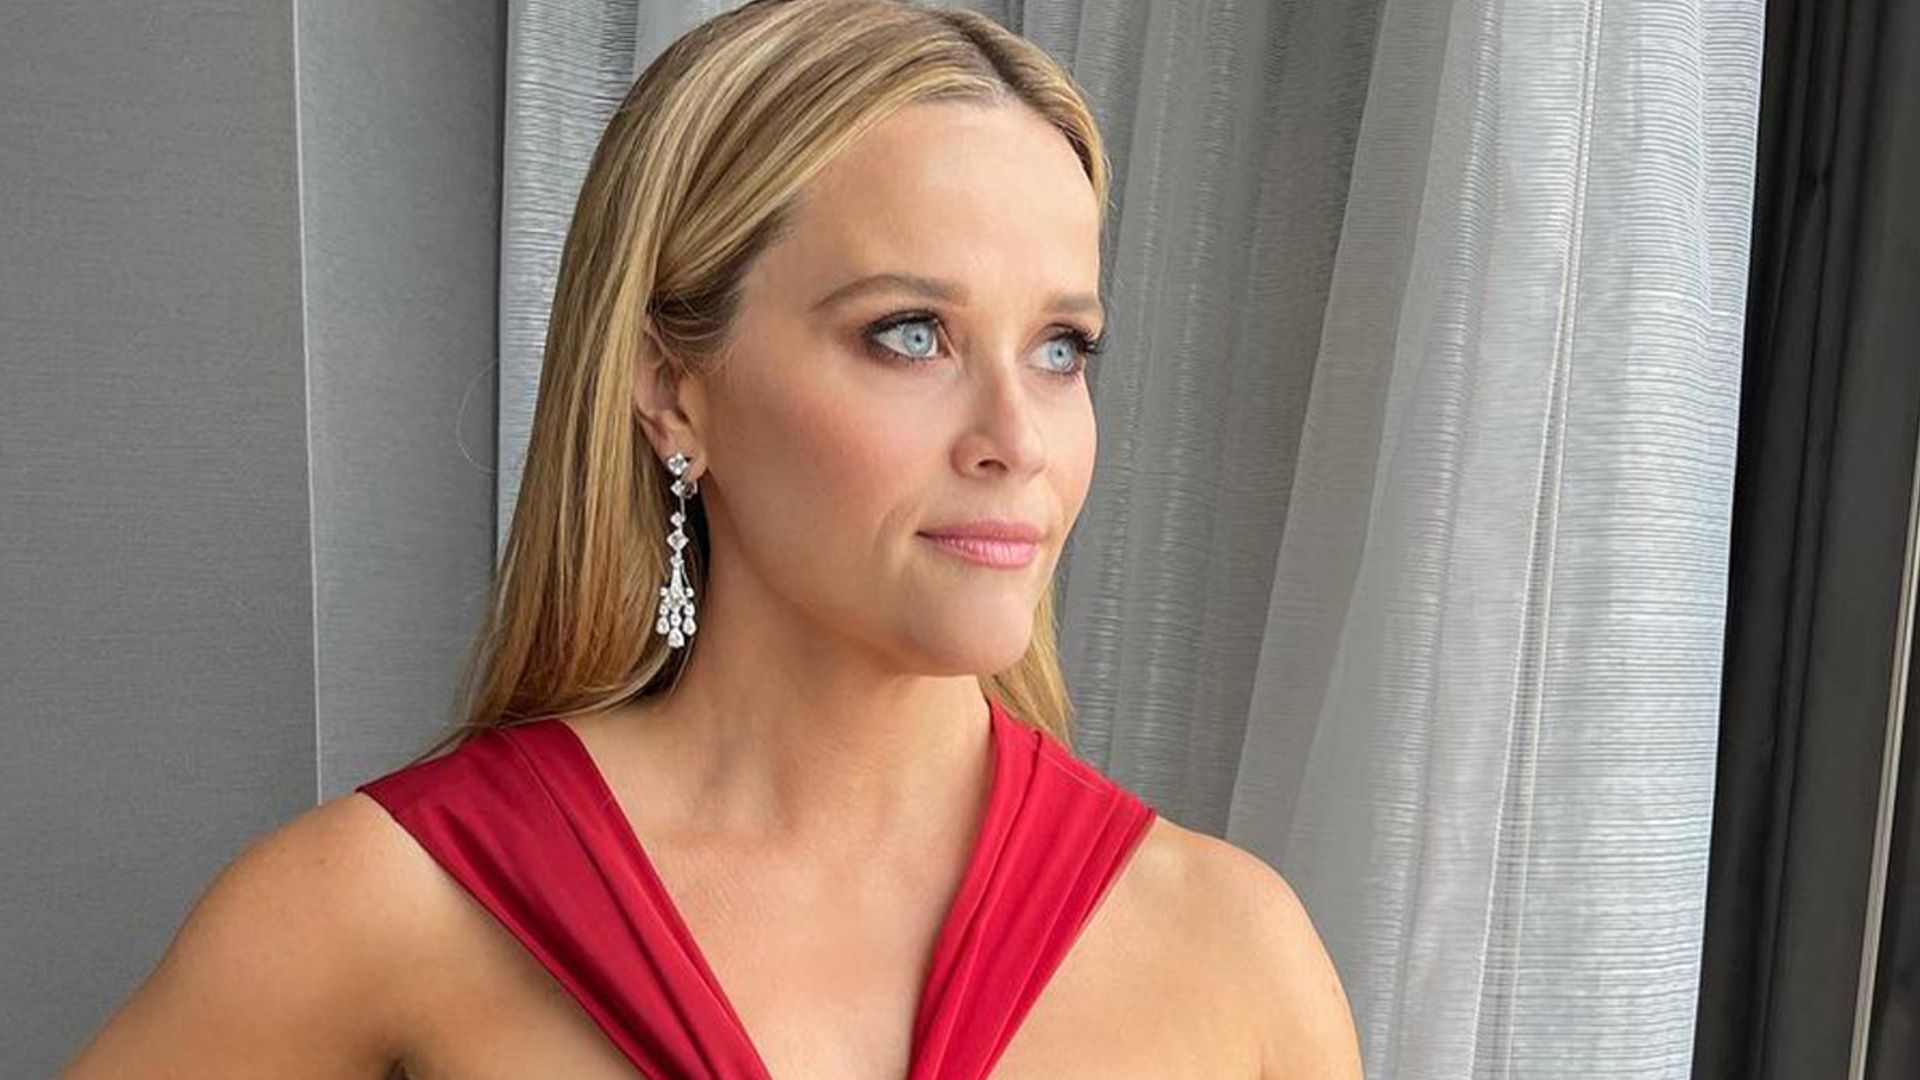 Reese Witherspoon sends fans wild in head-turning red dress at Oscars